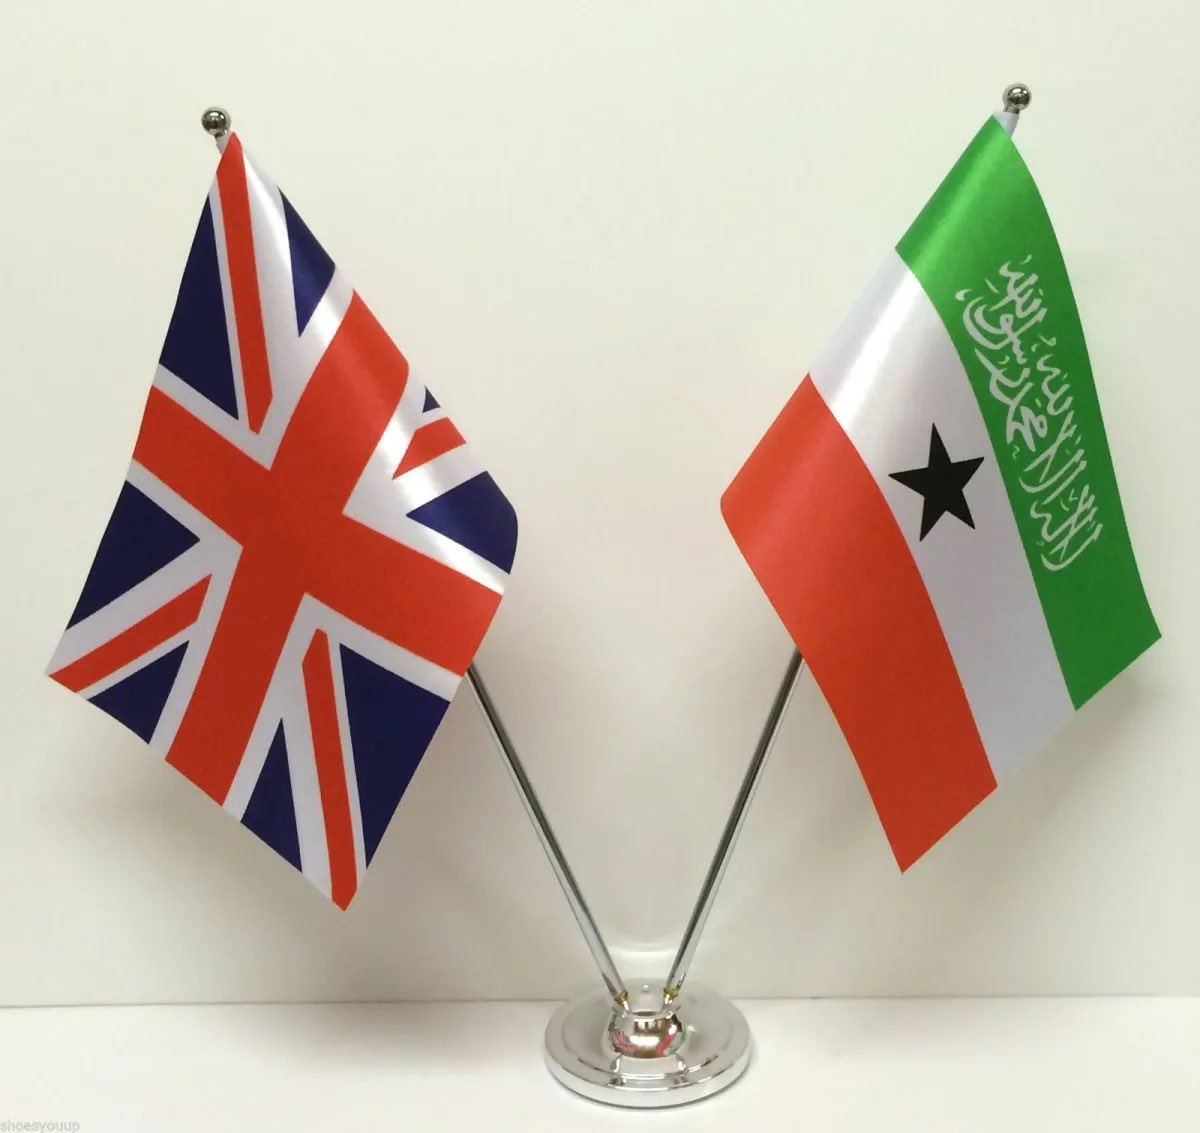 “Recognition of Somaliland would be a most cost-effective means to ensure security in an otherwise troubled and problematic region.”

Official statement from the UK Foreign & Commonwealth Office (2010)

#SetSomalilandFree
#55thAfricanState
#RespectTheMoU